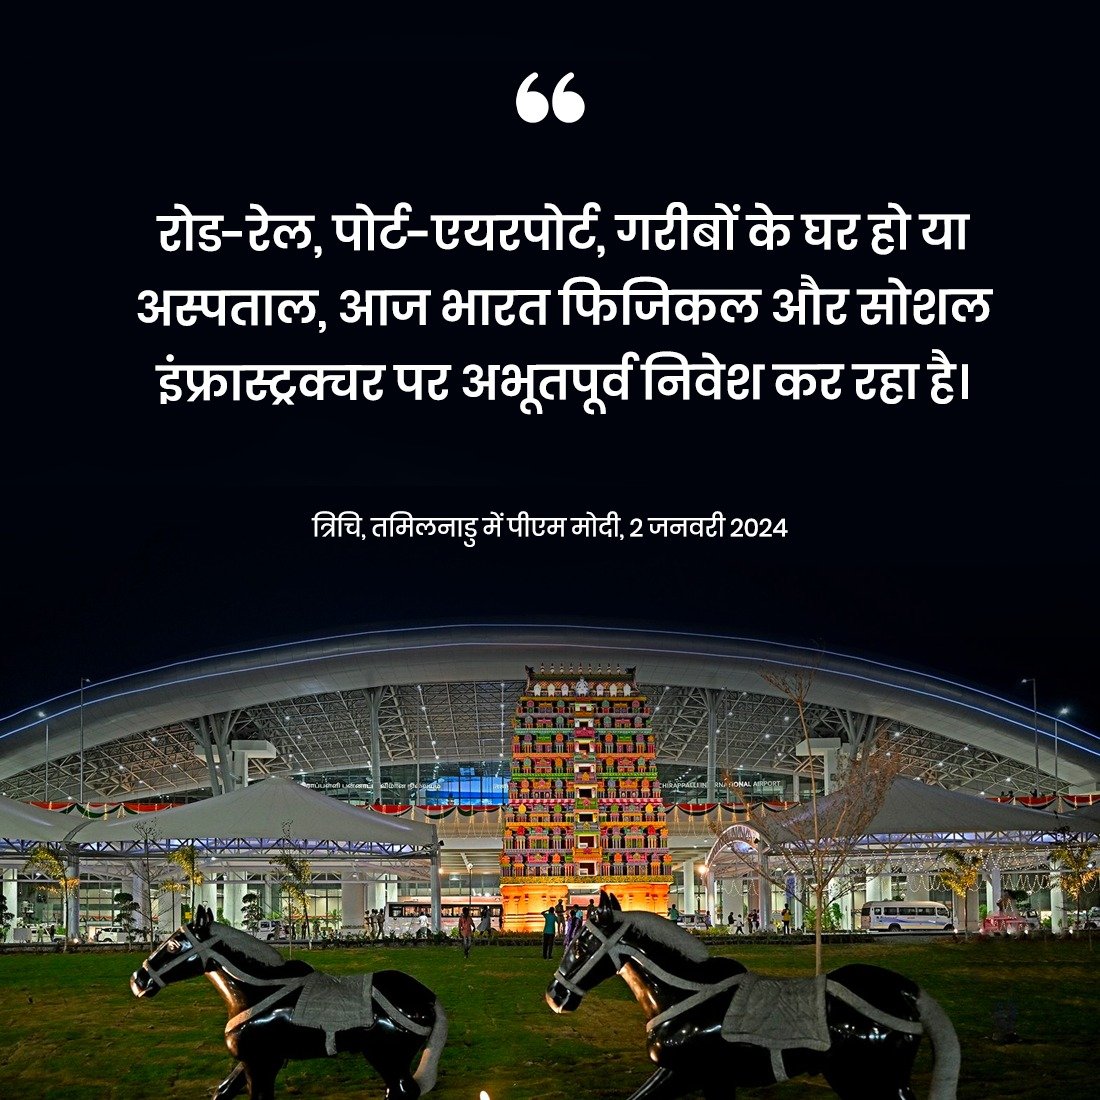 India is making unprecedented investment in physical and social infrastructure.